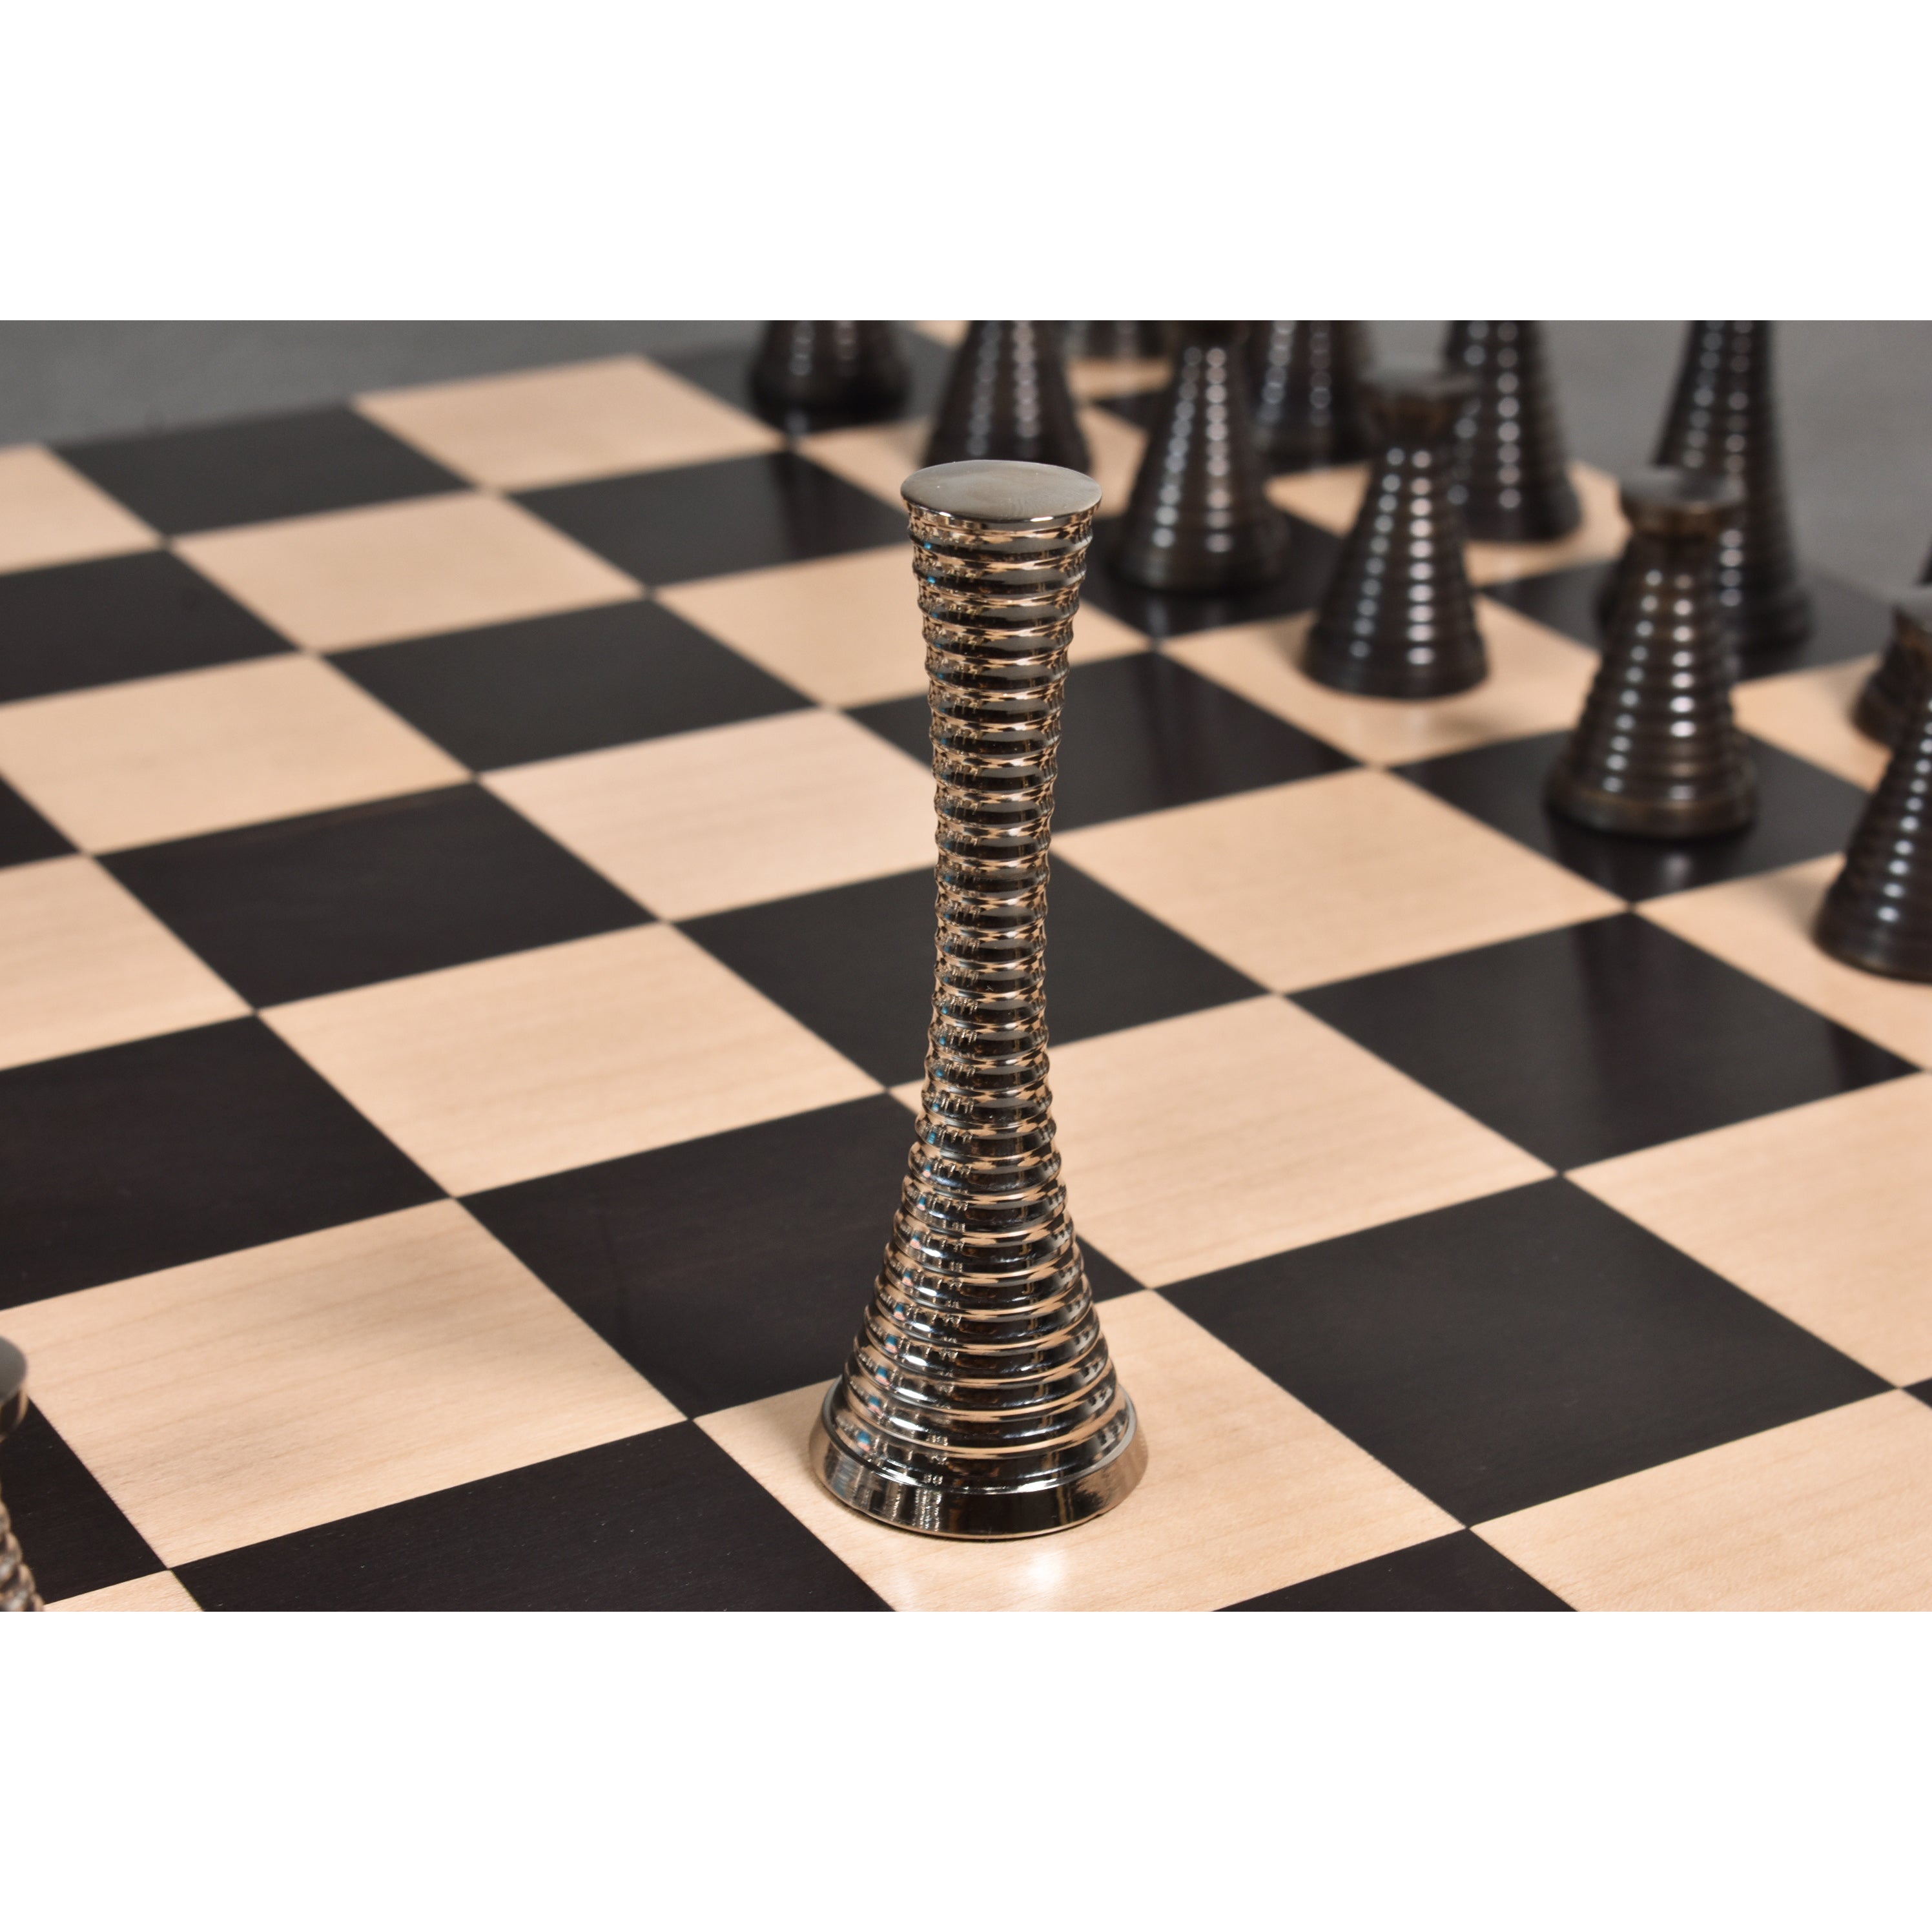 Modern Brass Metal Luxury Chess Pieces Only Set